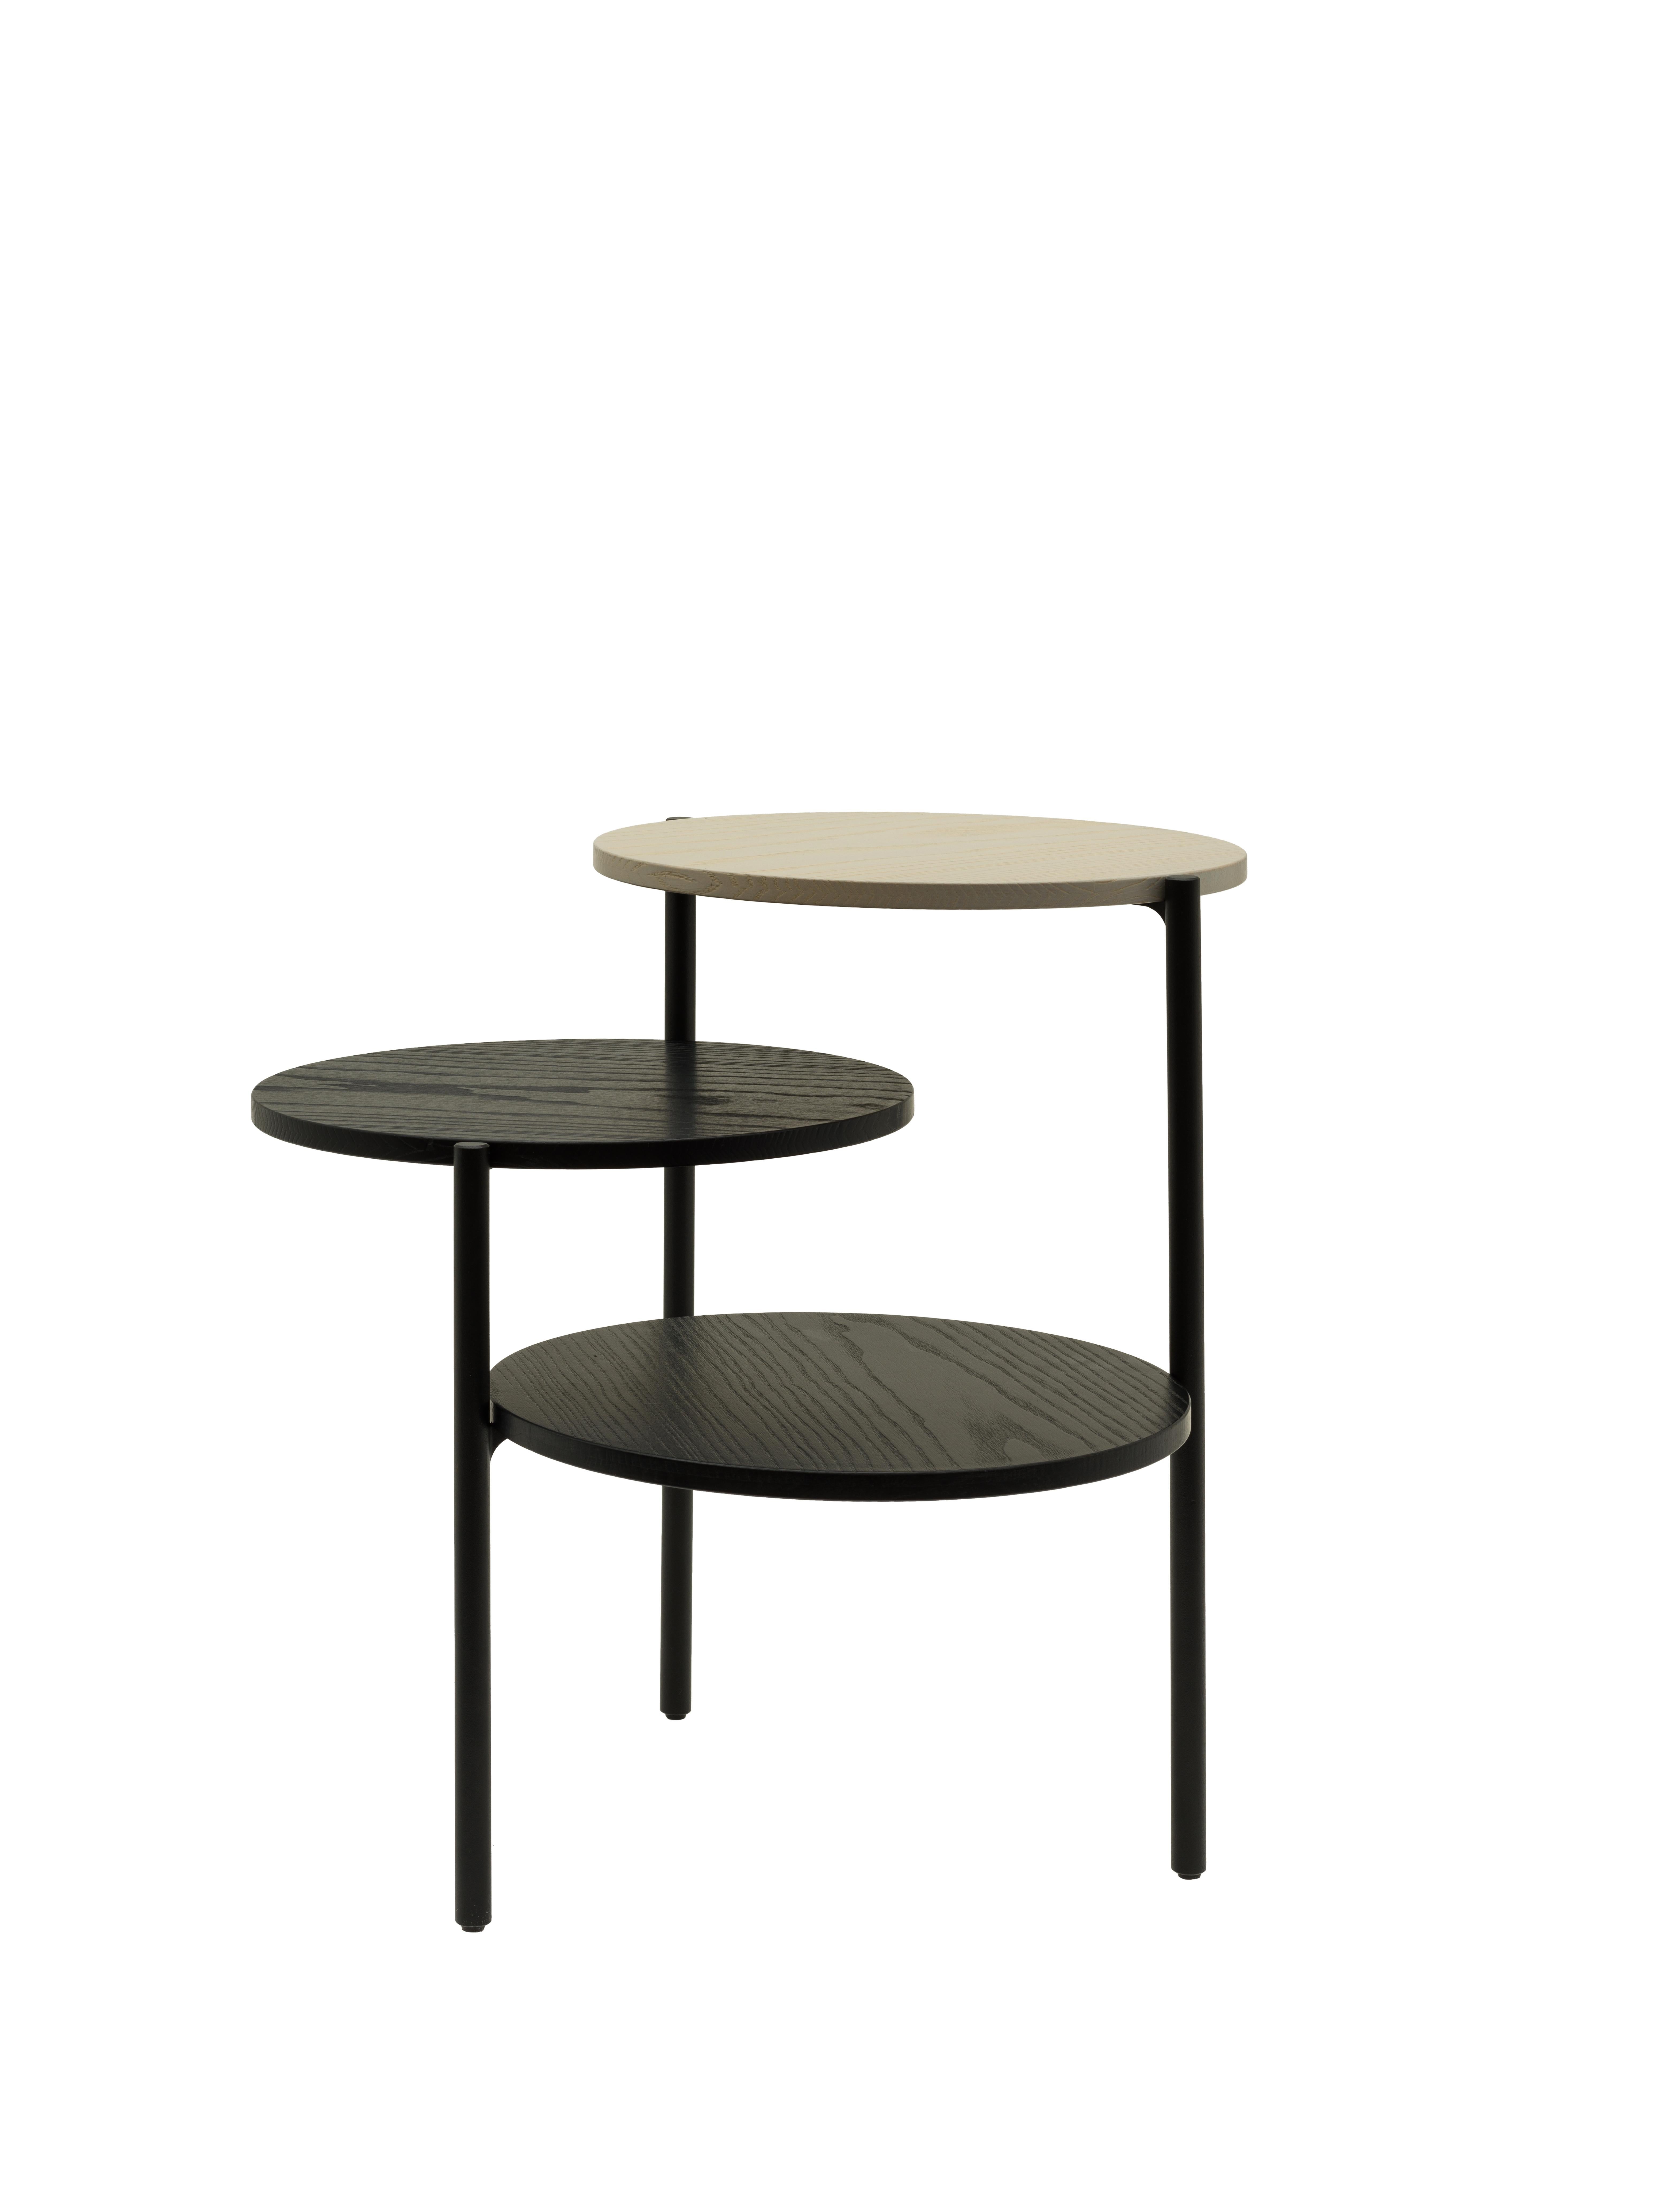 Pair of black & grey triplo table by Mason Editions
Dimensions: 54 × 54 × 52.5 cm
Materials: iron, ash
Colours: total black, total blue, total light grey, blue + coral, black + light grey, light grey + pumpkin

This side table is based on the